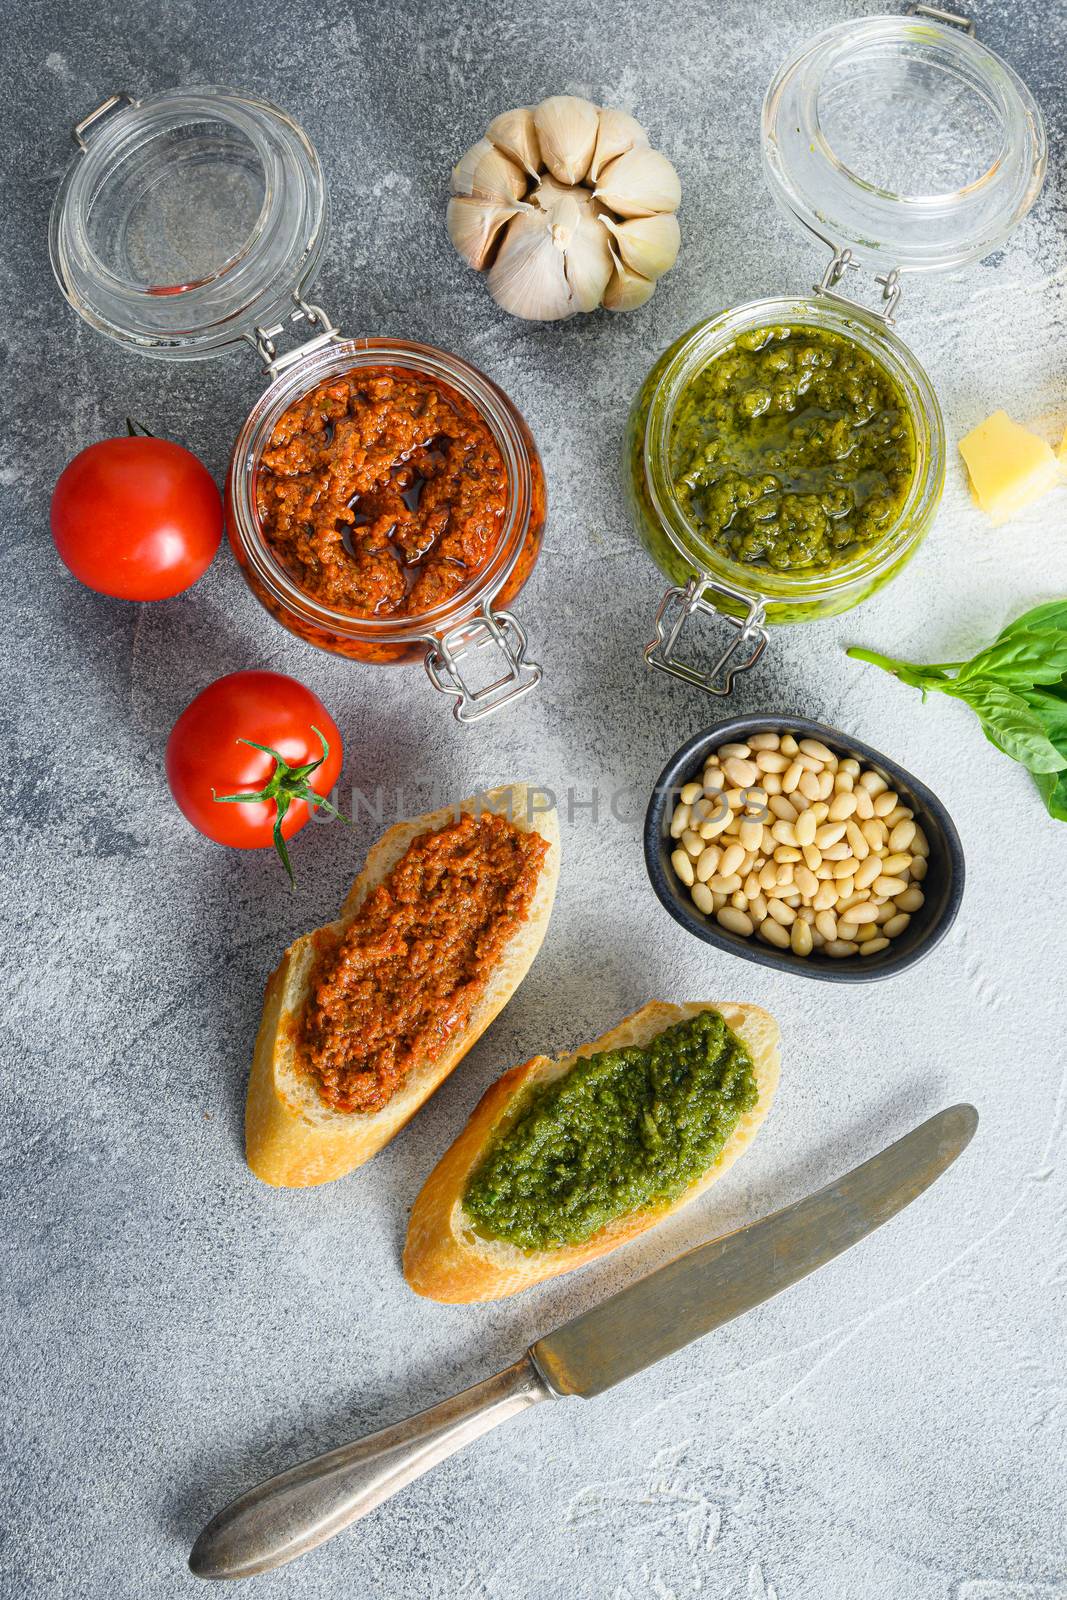 Glass jars with red and green pesto and cooking italian recipe ingredients Parmesan cheese, basil leaves, pine nuts, olive oil, garlic, salt, tomatoes breakfast panini with sauce top view on grey concrete surface by Ilianesolenyi